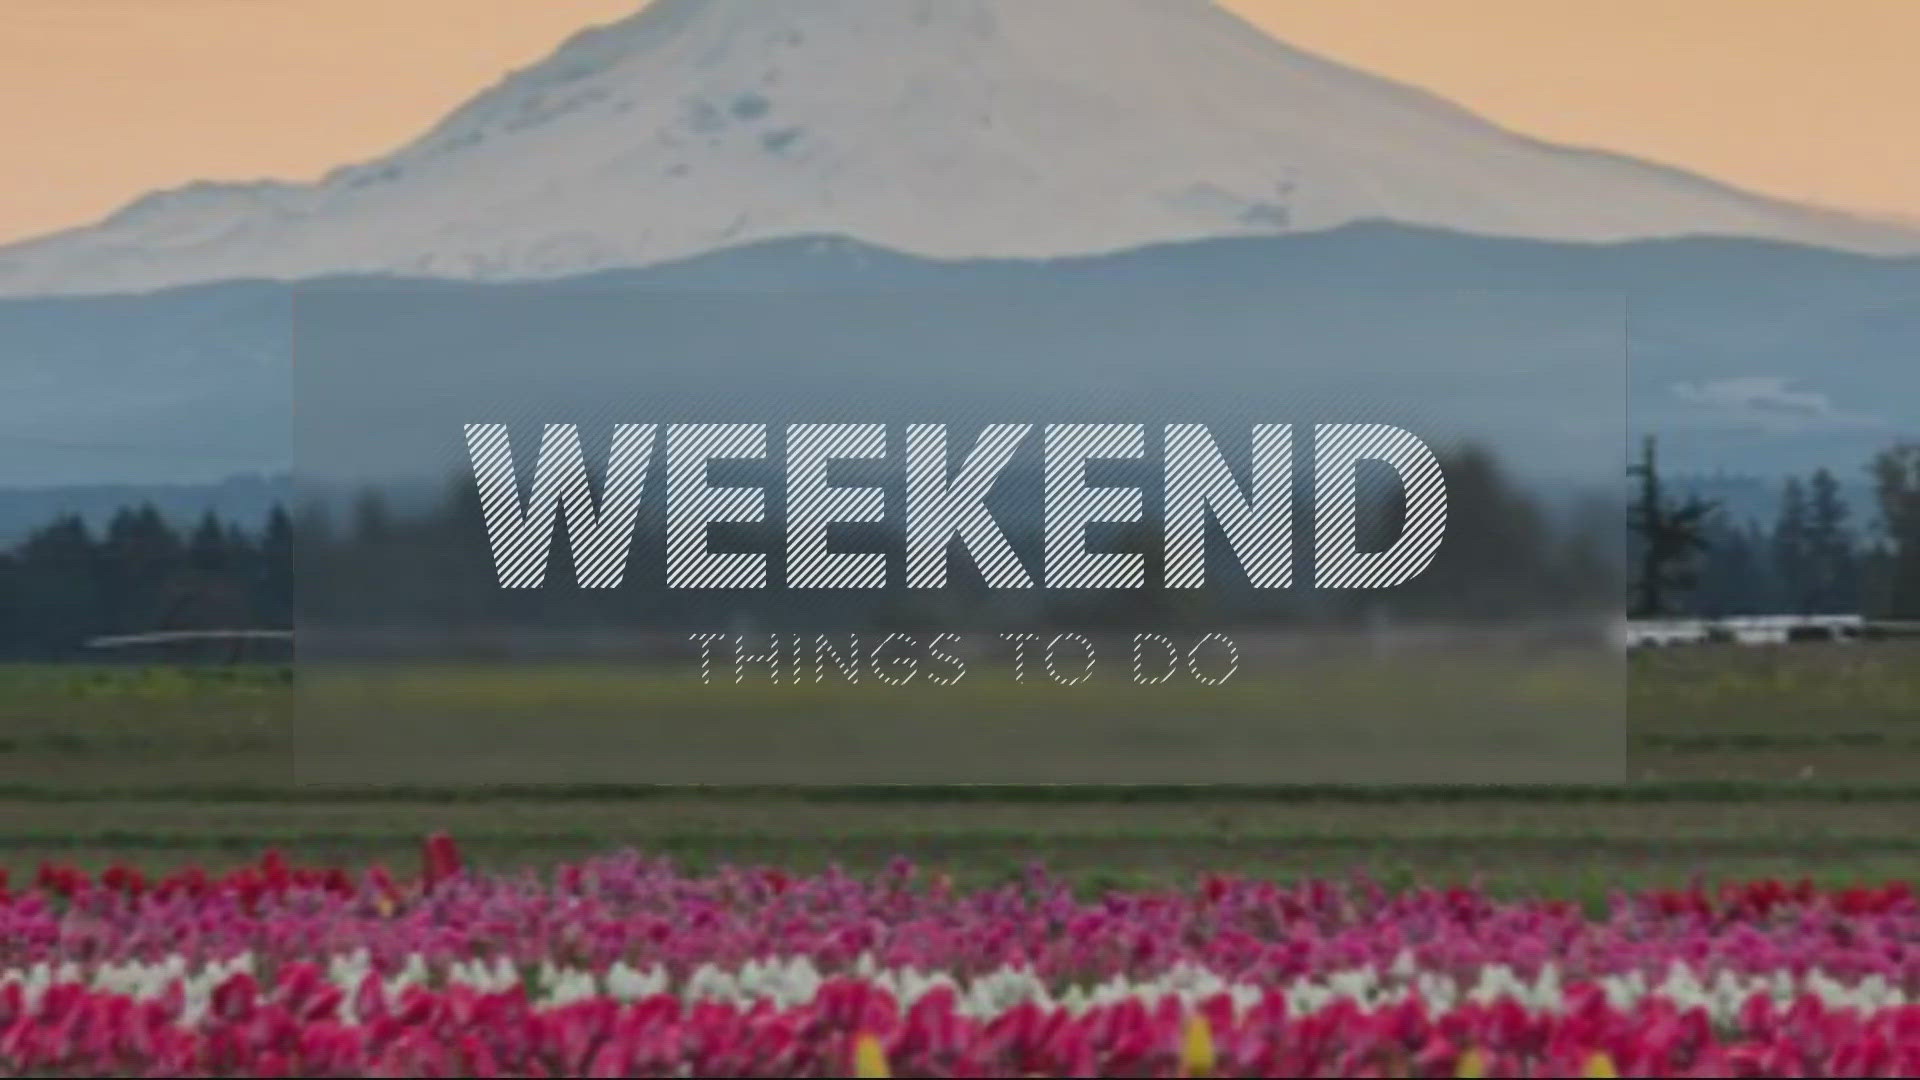 Here's what's happening around Portland this weekend: Juneteenth festivities, the start of Beer Week, Lake Oswego Festival of the Arts, BEYONCÉ dance party and more.